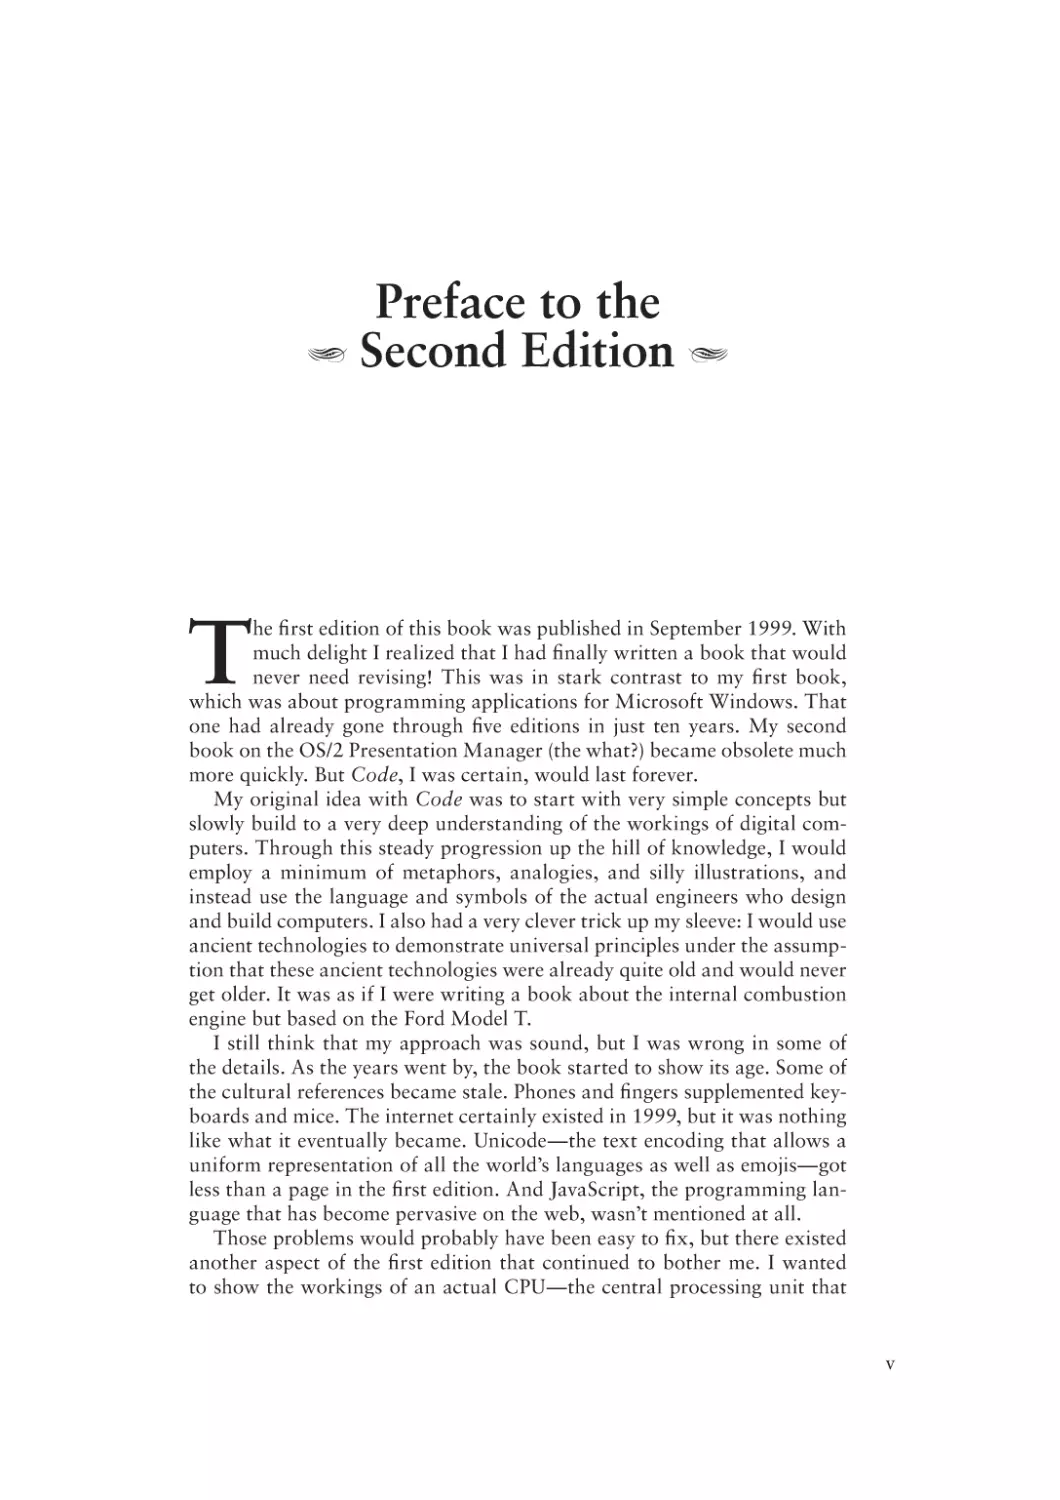 Preface to the Second Edition